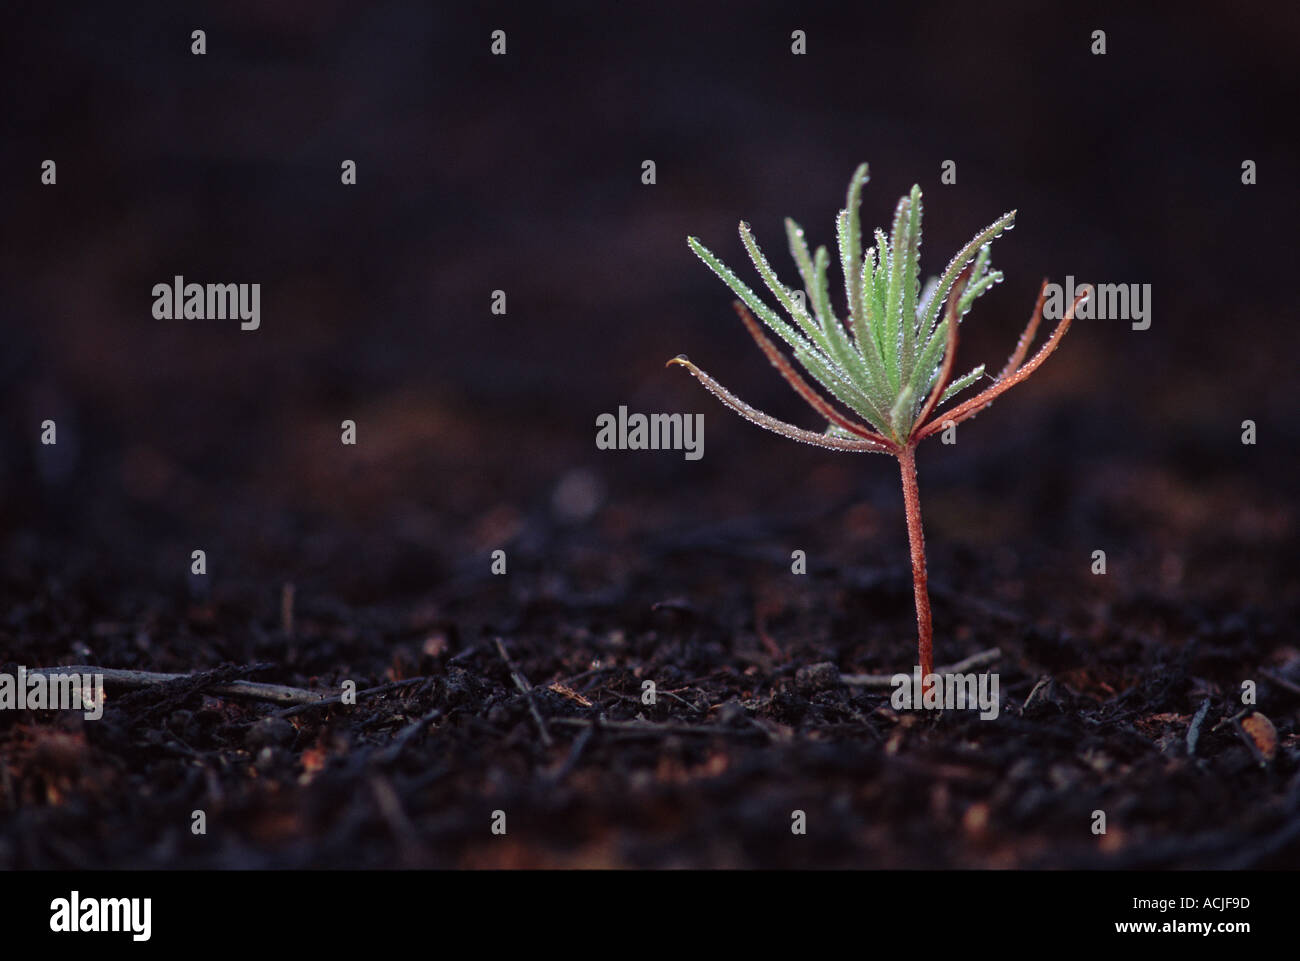 Coniferous tree seedling two months after heathland fire Kalmthout Belgium Europe Stock Photo